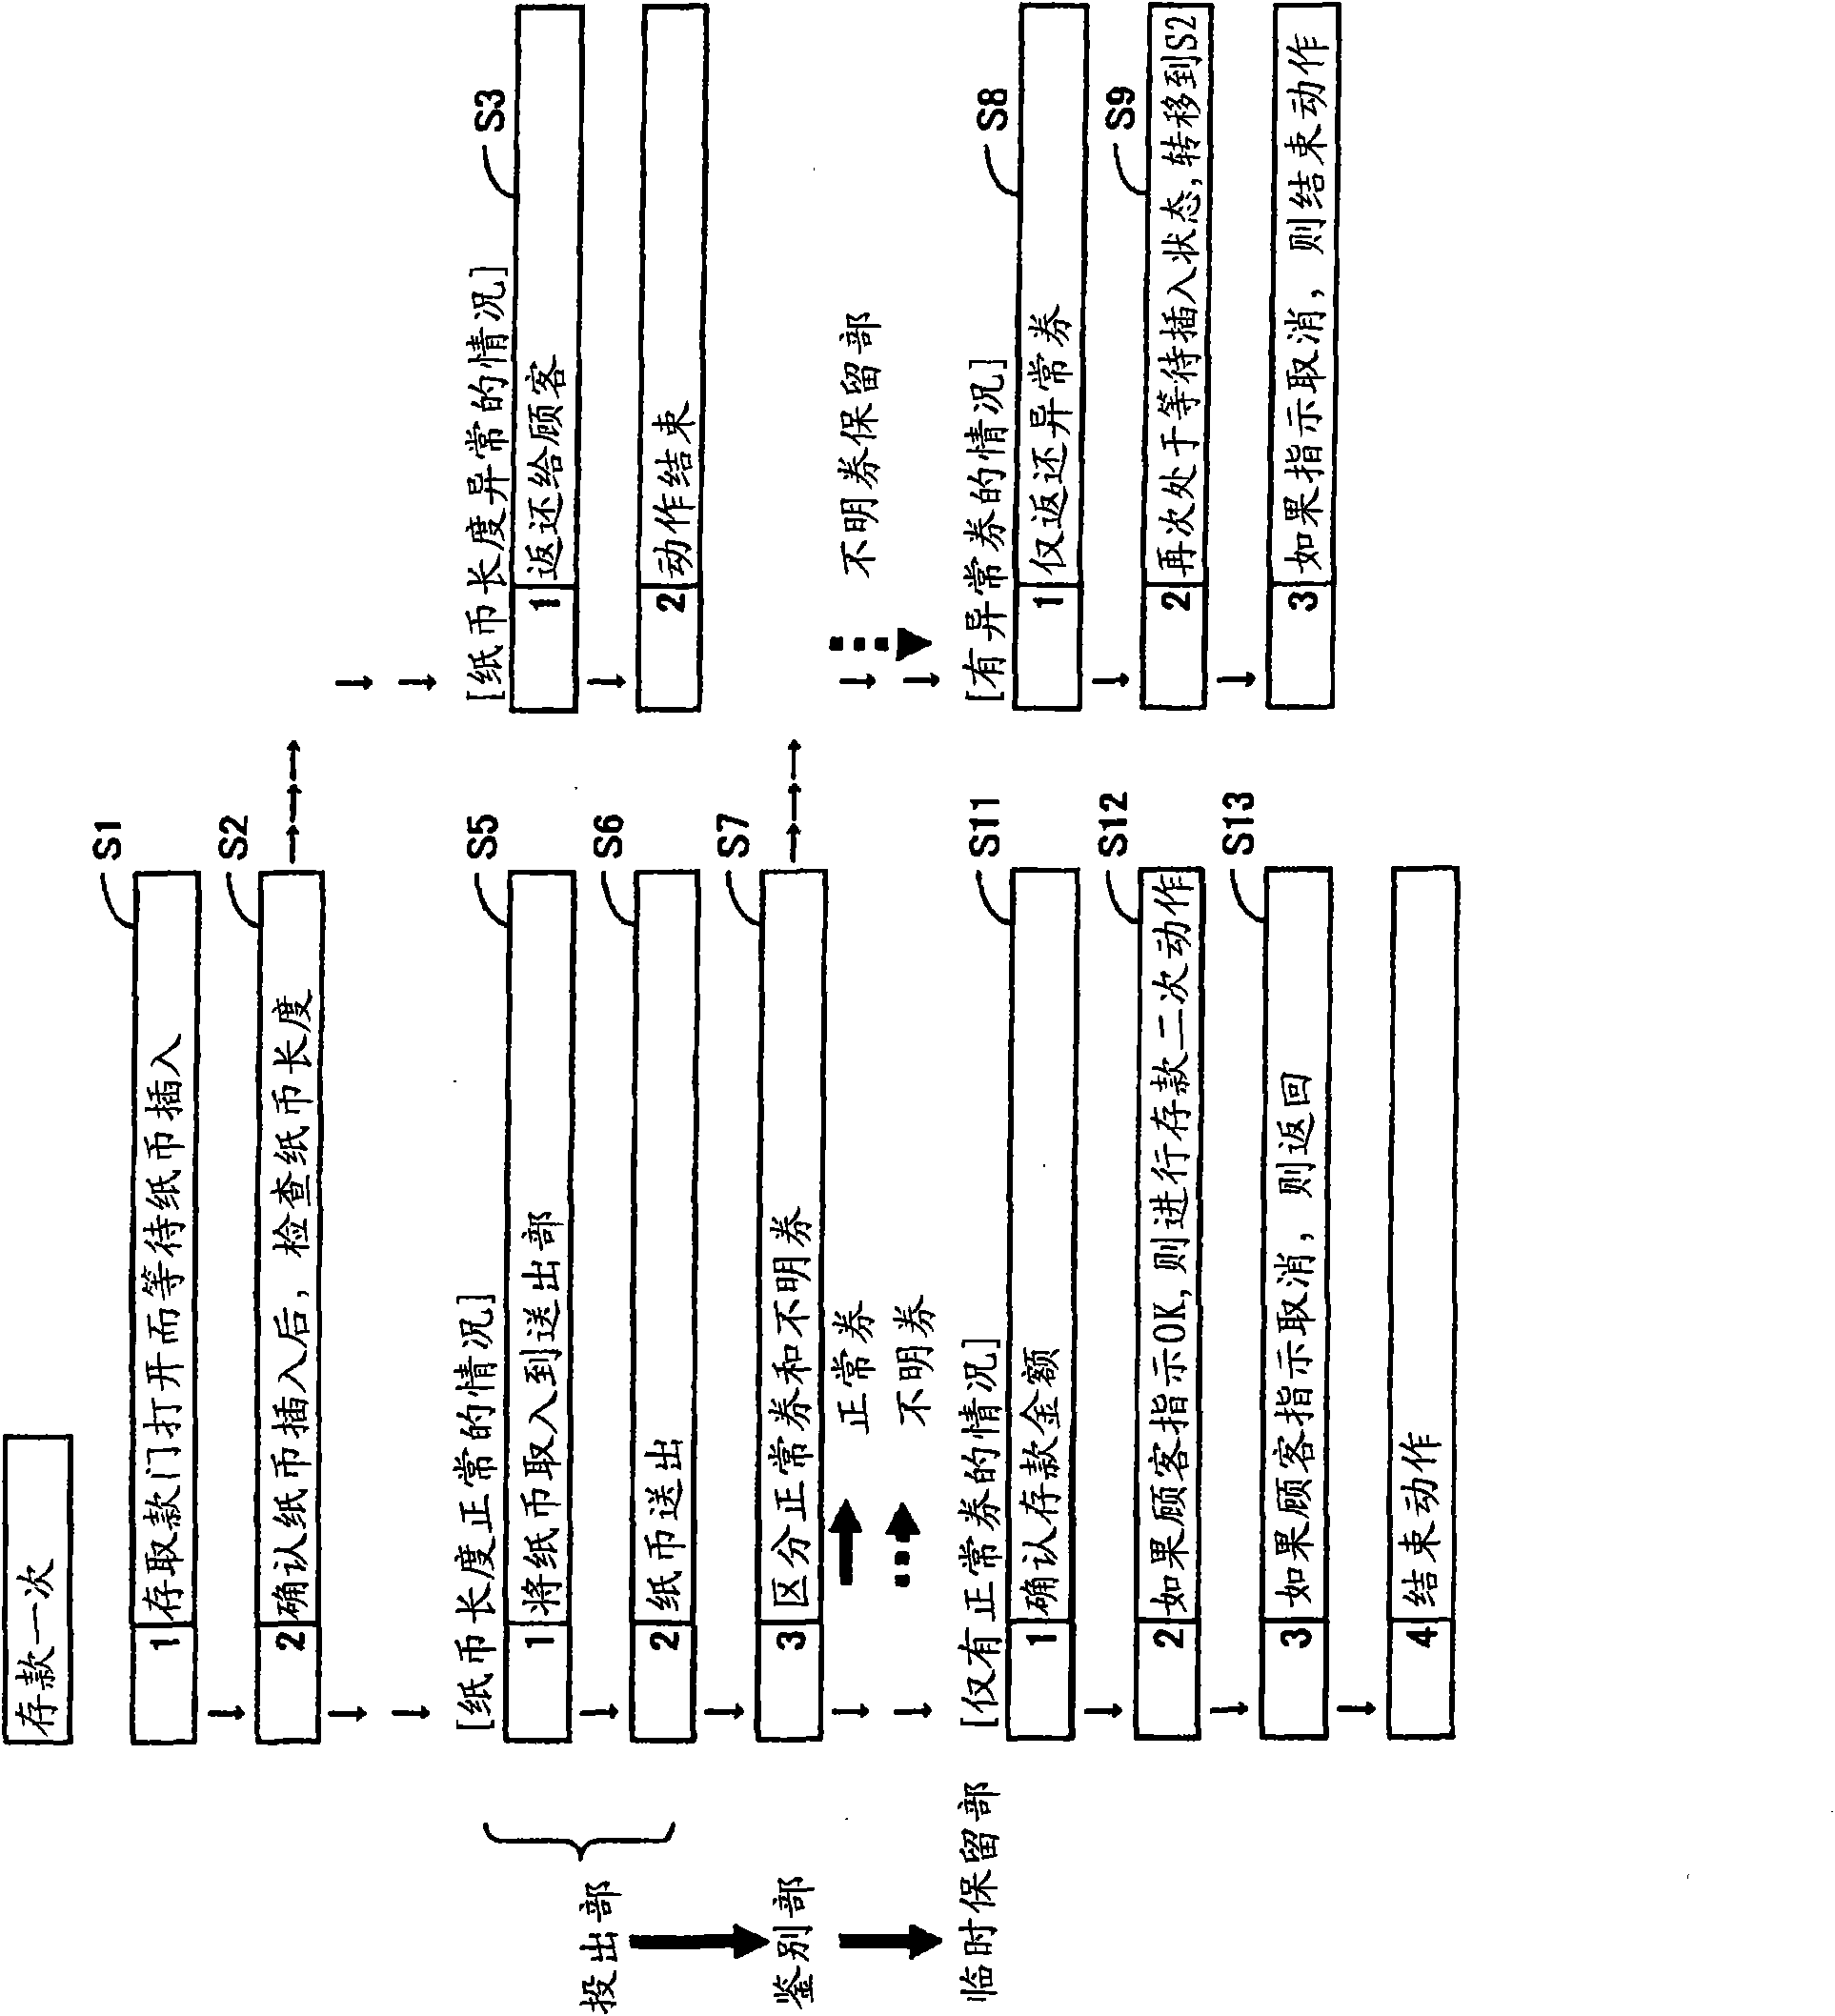 Pages processing apparatus